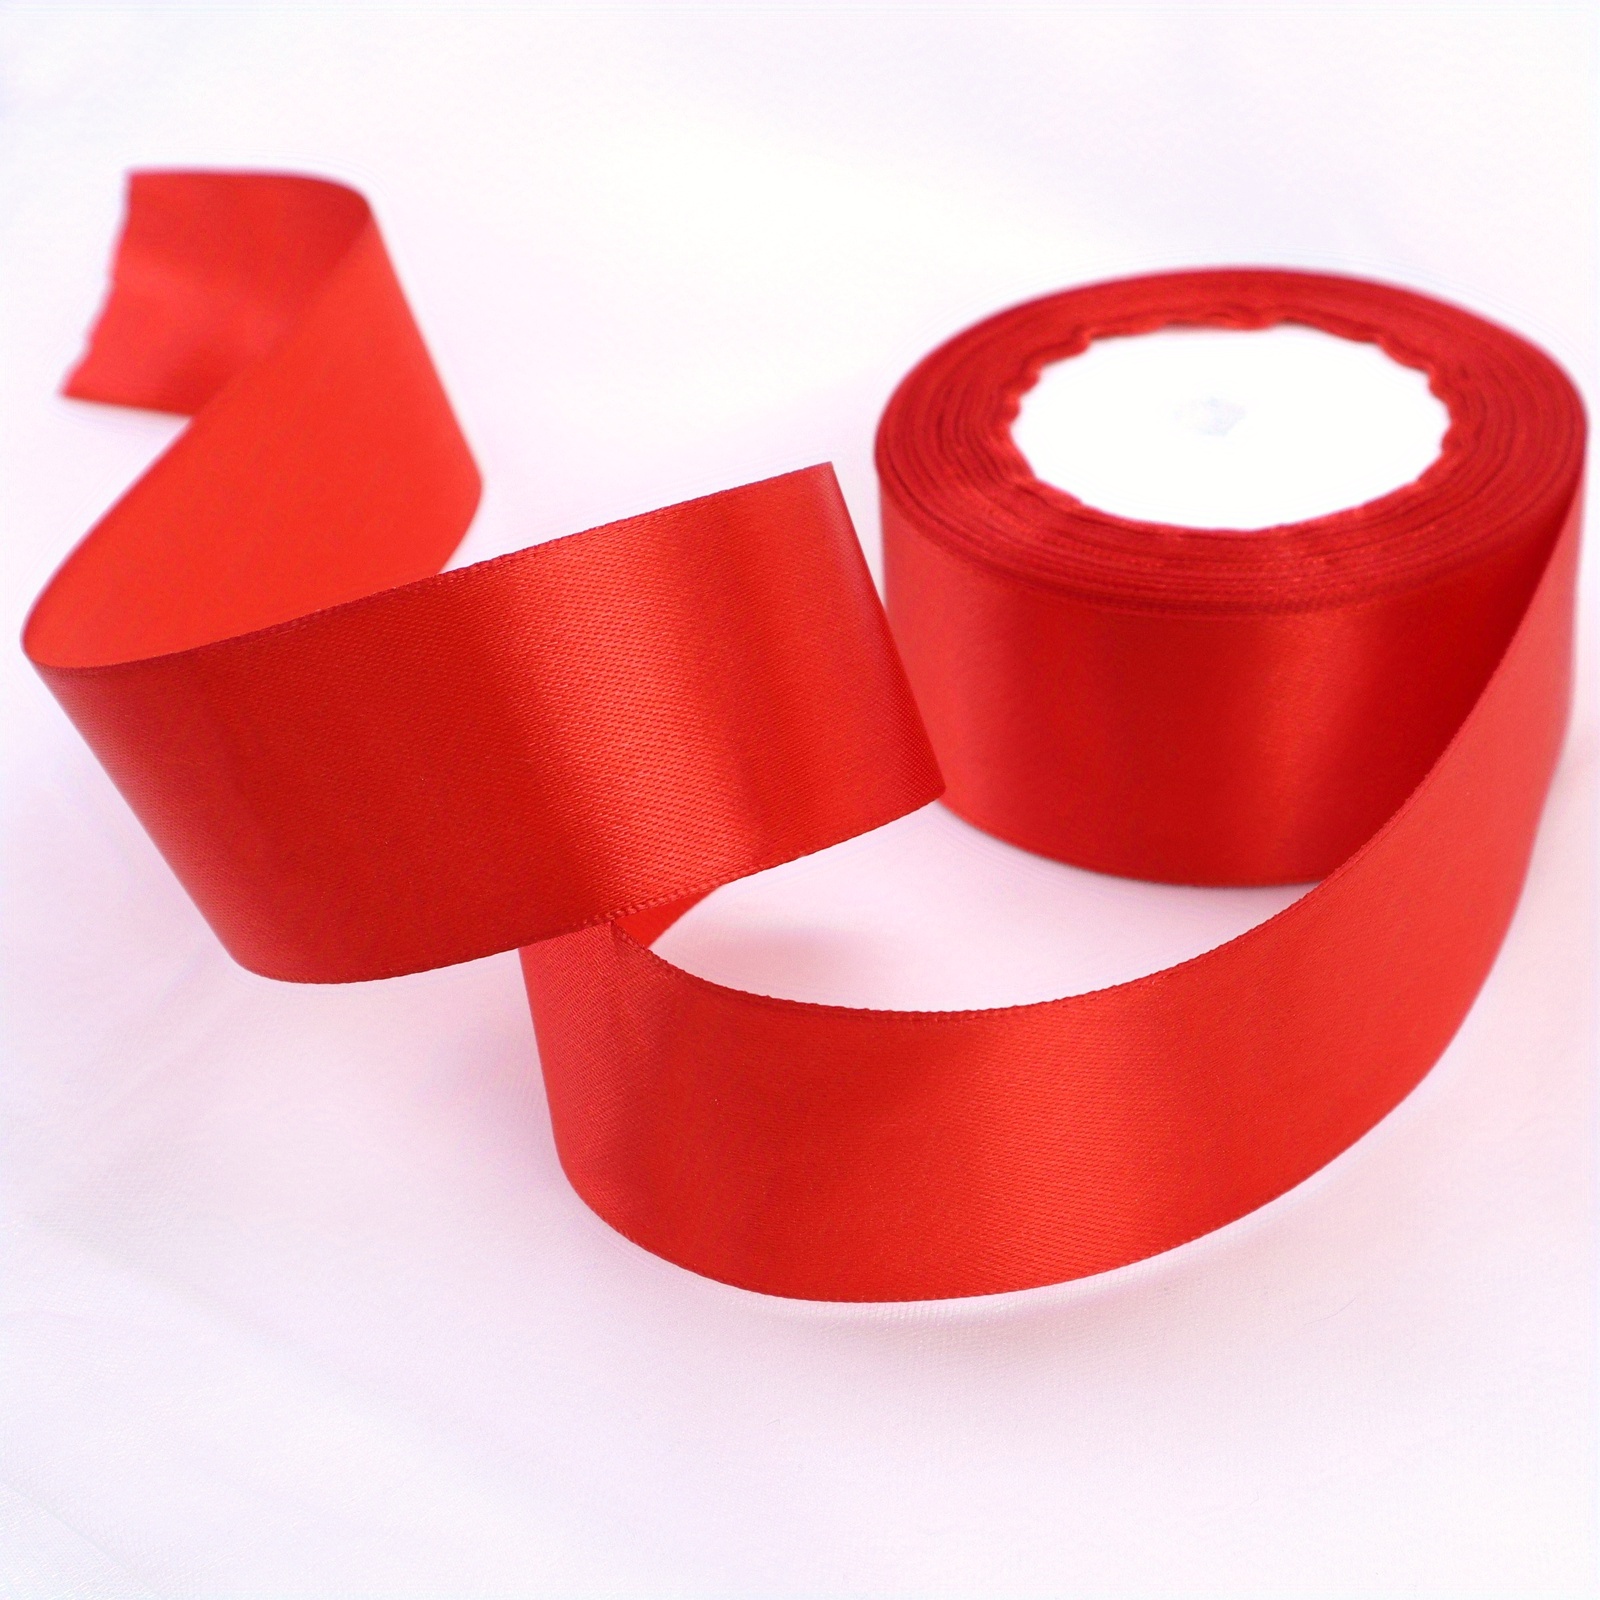 1 Inch Wide Satin Ribbon Roll Red 50 Yards Printing Just for You Fabric  Craft Ribbon for Wedding Birthday Valentine's Day Flowers Packaging Box  Paper